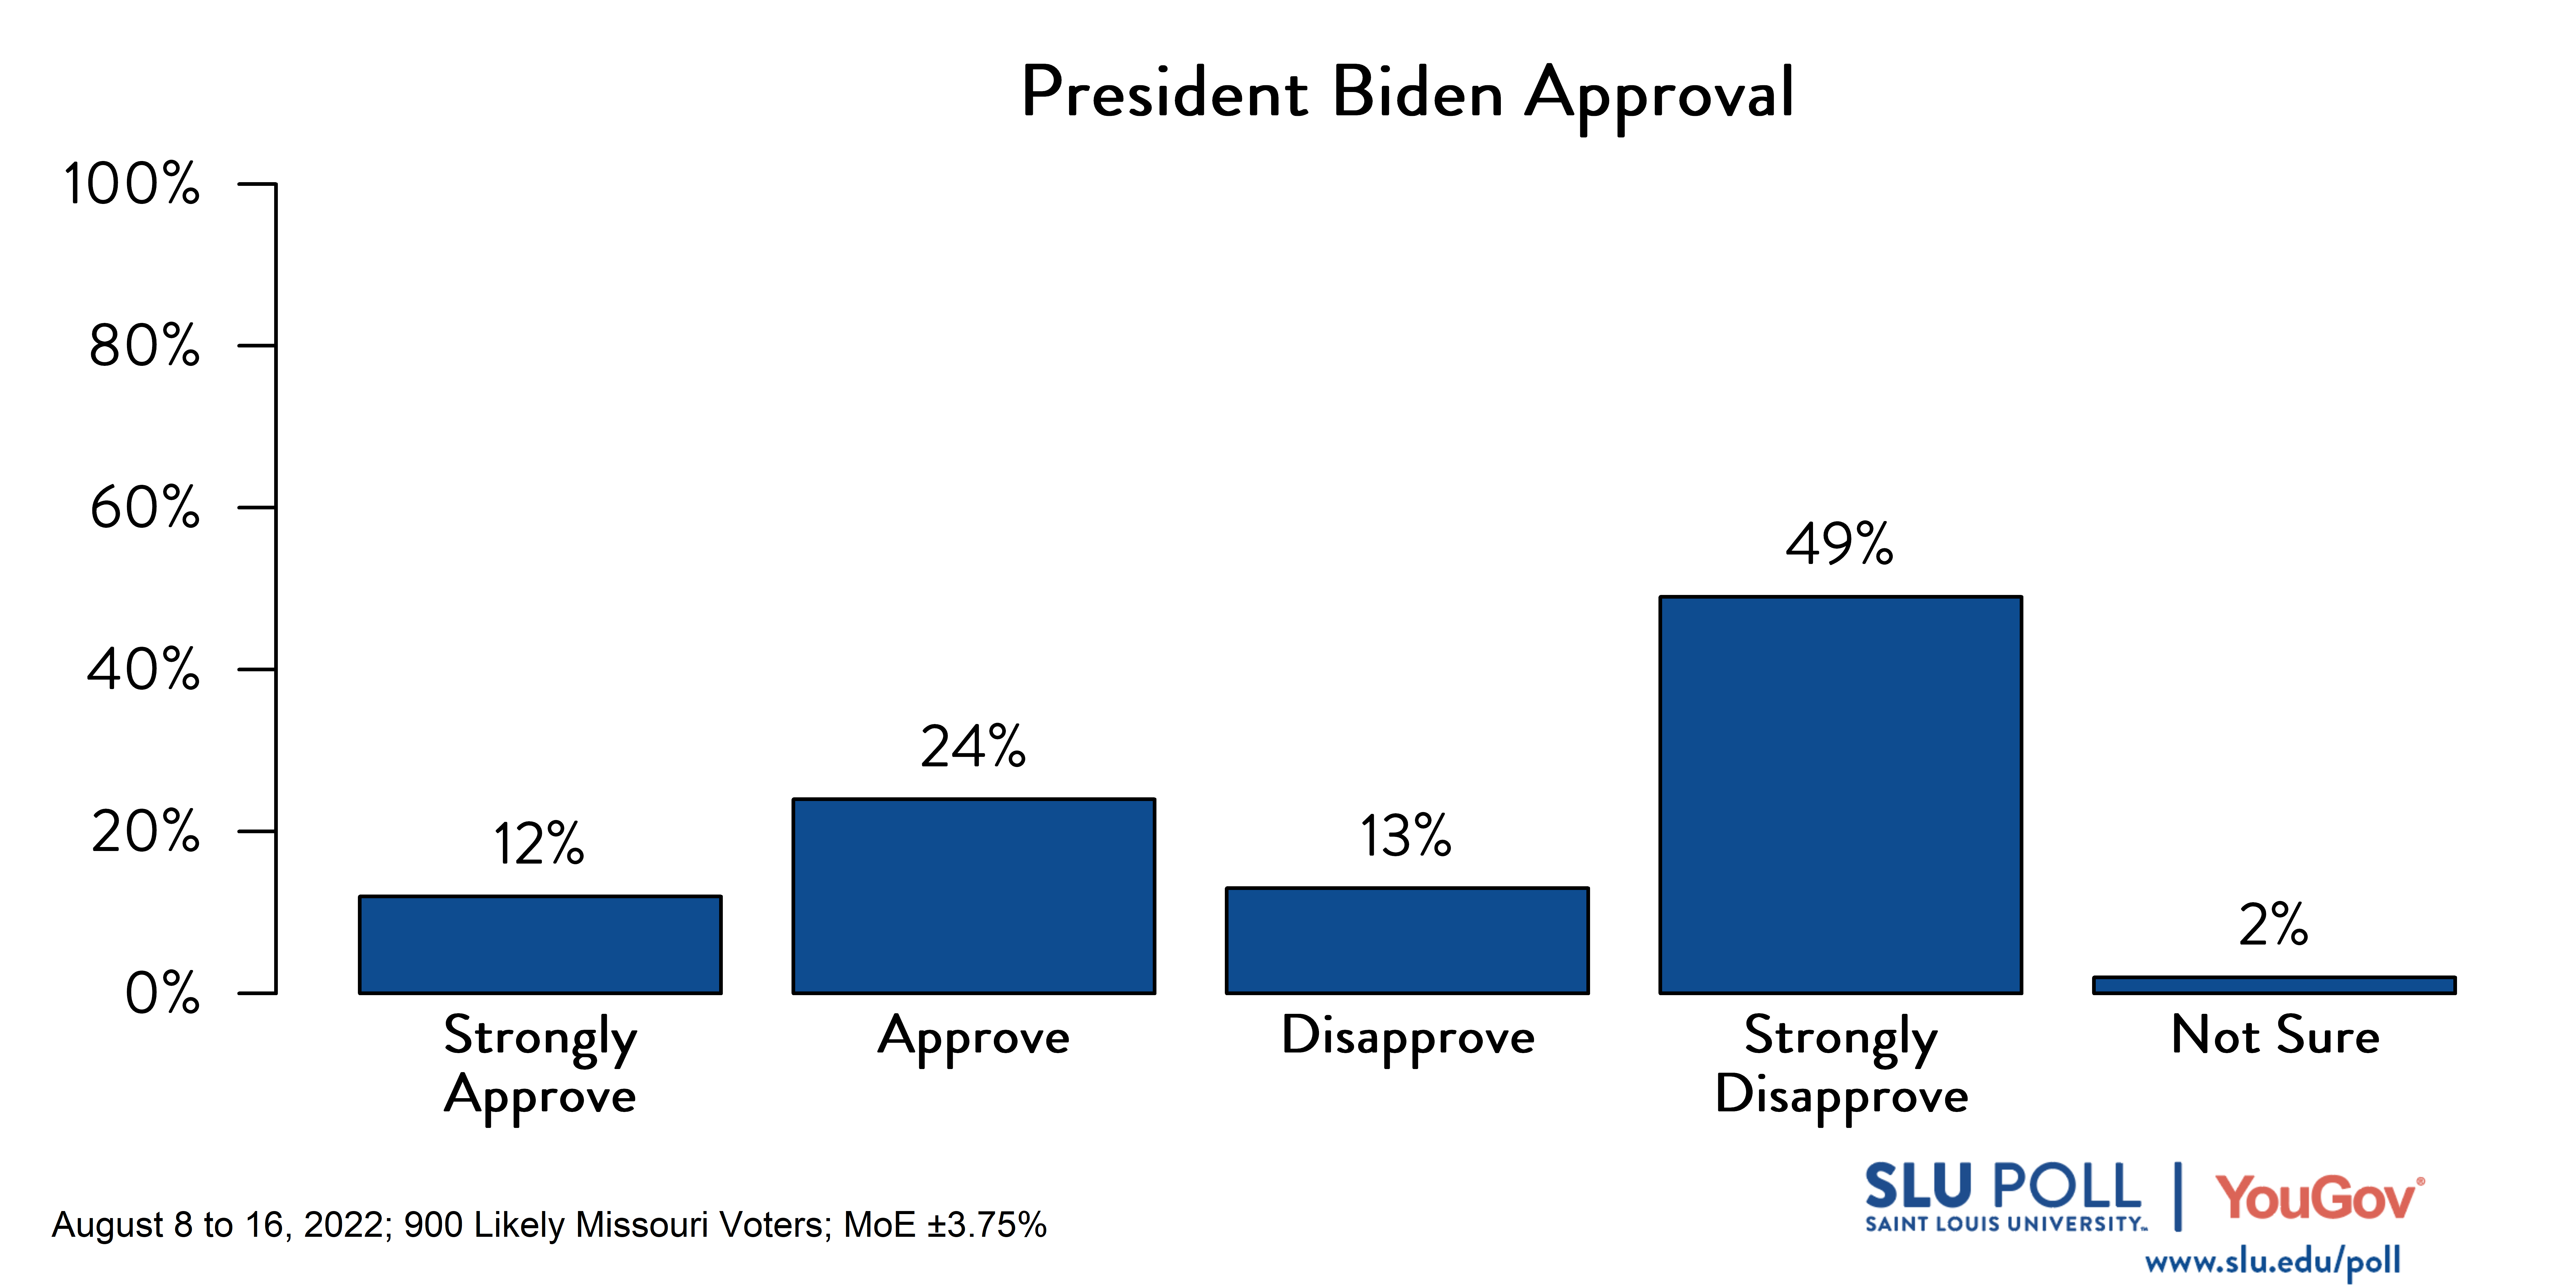 Likely voters' responses to 'Do you approve or disapprove of the way each is doing their job: President Joe Biden?': 12% Strongly approve, 24% Approve, 13% Disapprove, 49% Strongly disapprove, and 2% Not sure. 